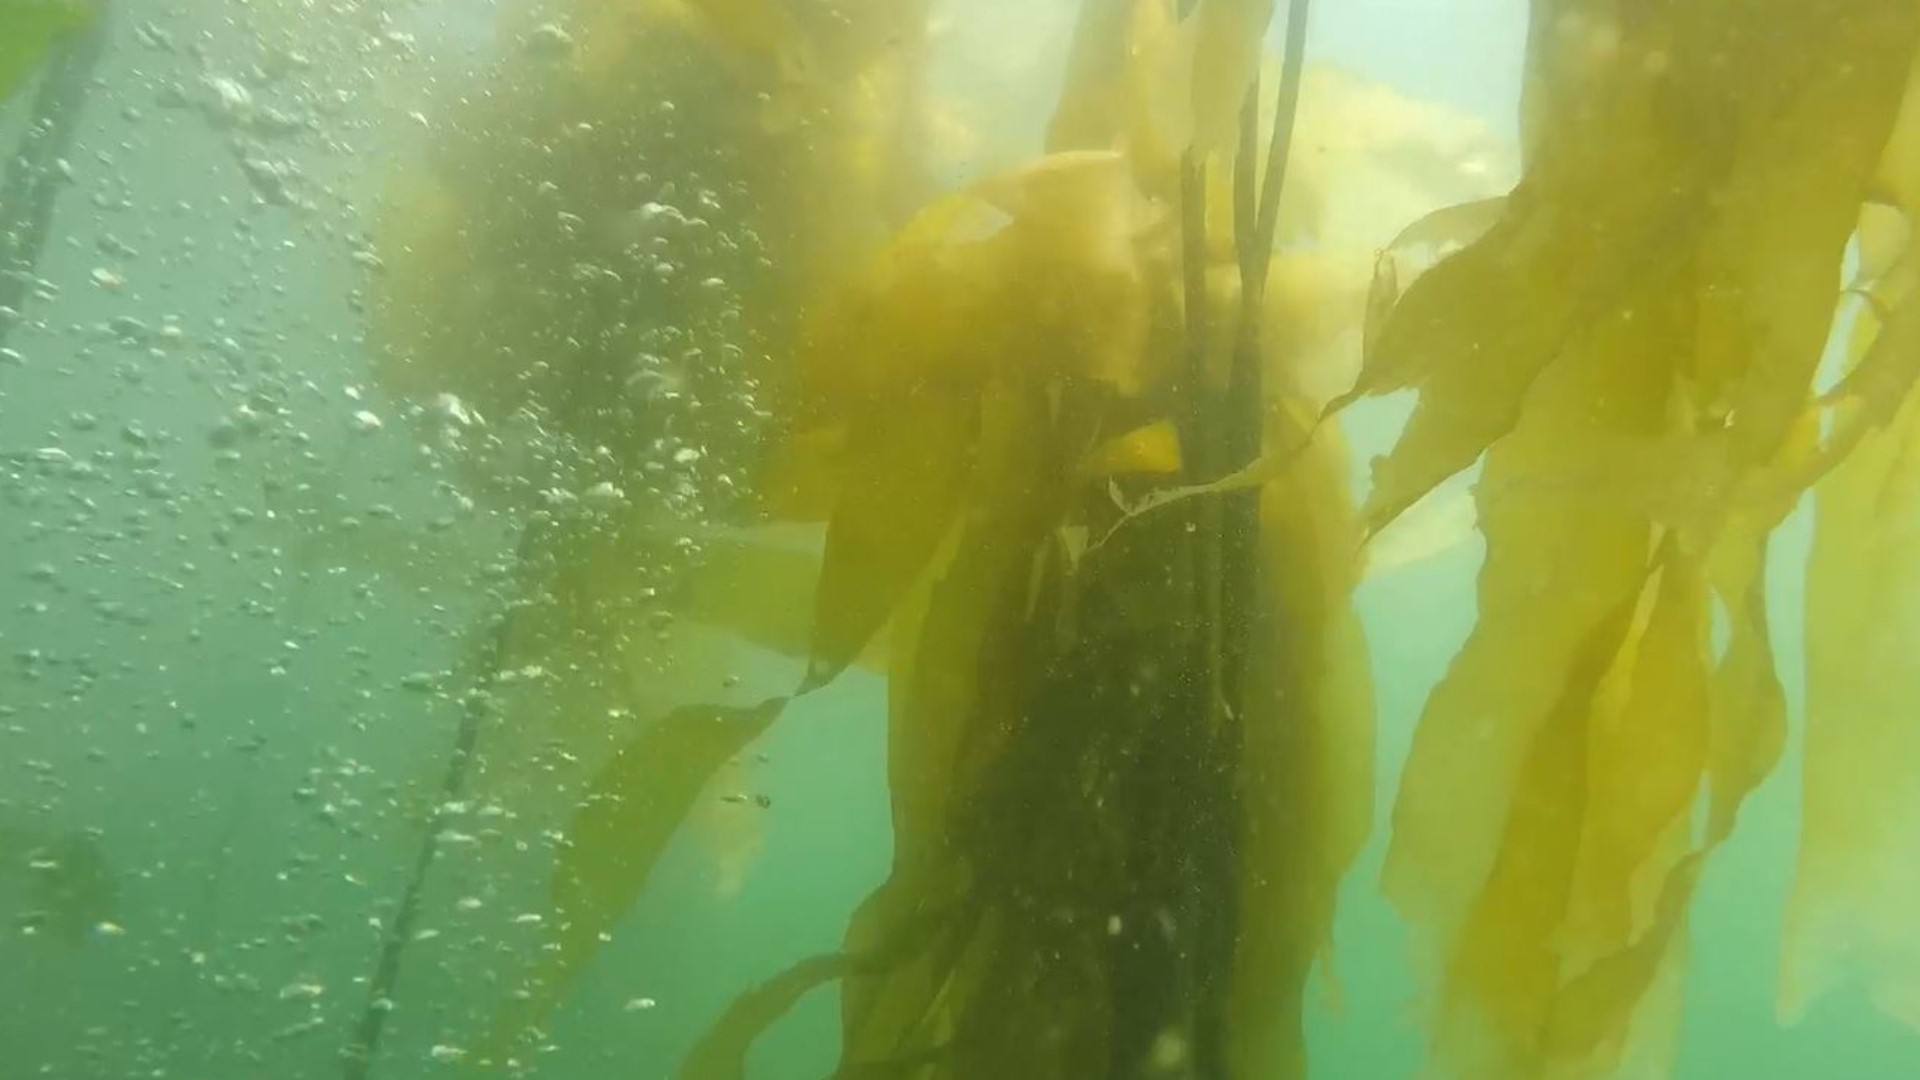 The Northwest's Bull Kelp fields support a wide array of sea life, but they're disappearing. #k5evening